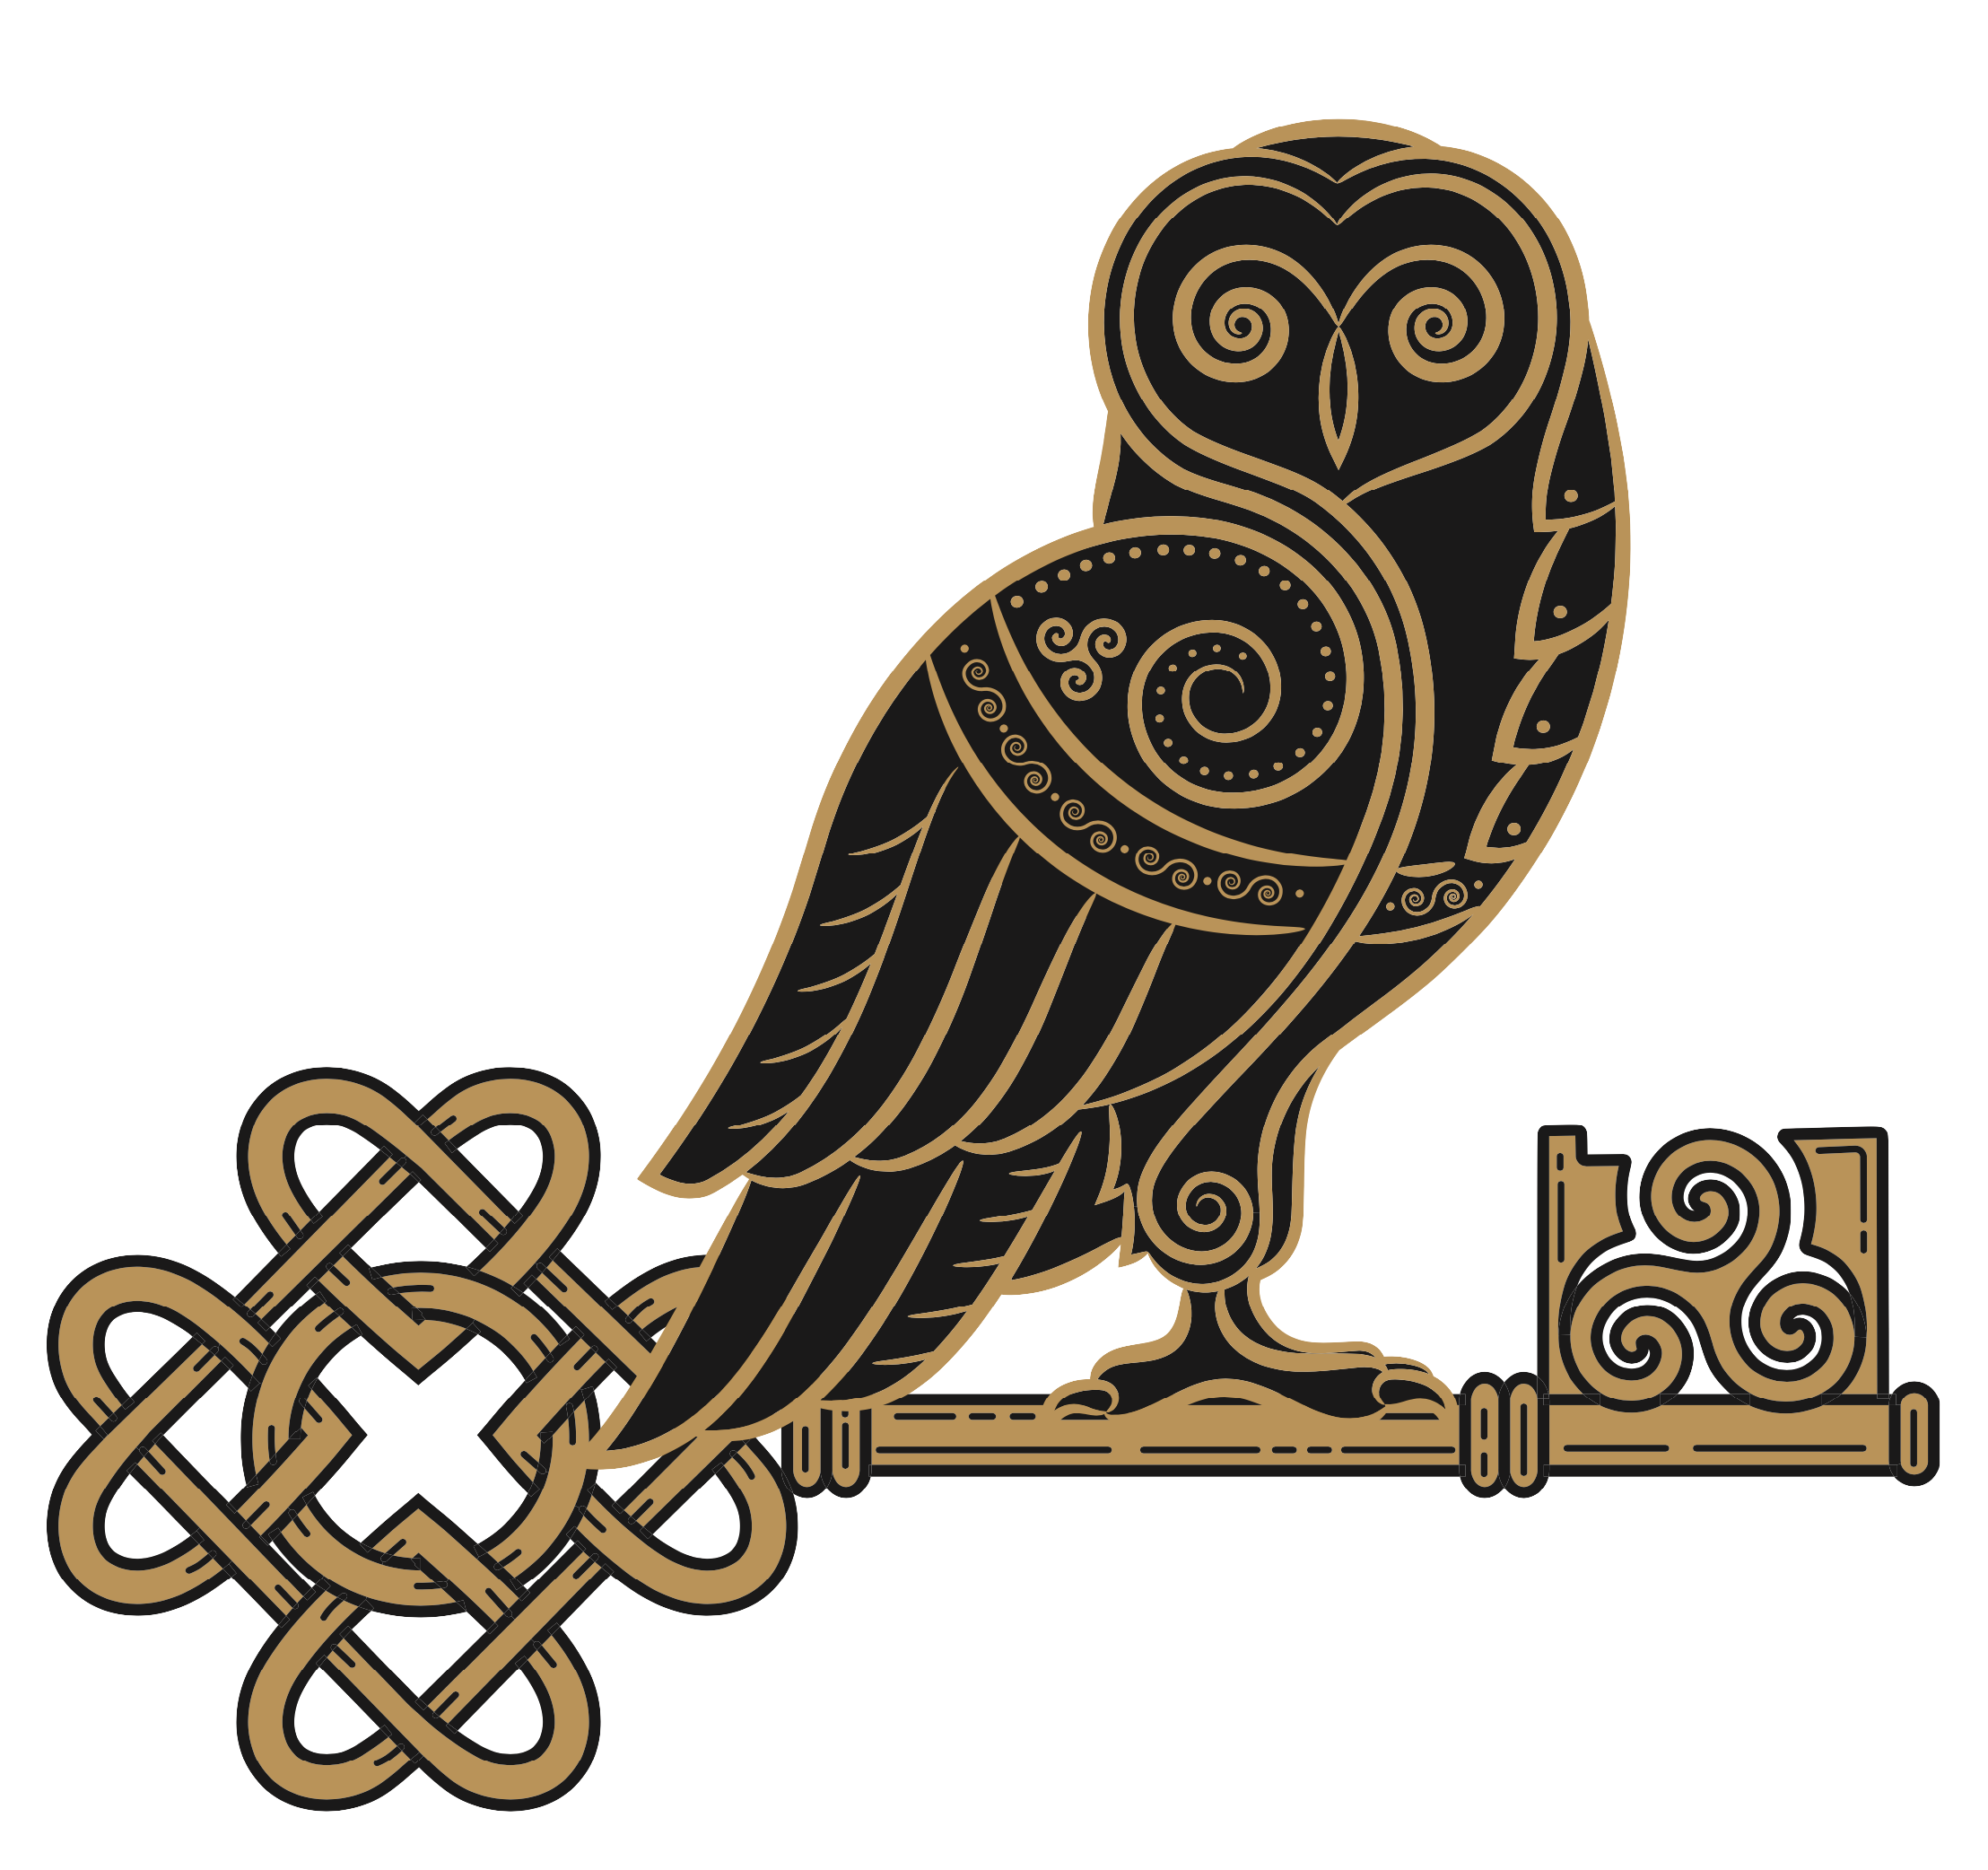 symbolic representation of wisdom as an owl perched on a golden key